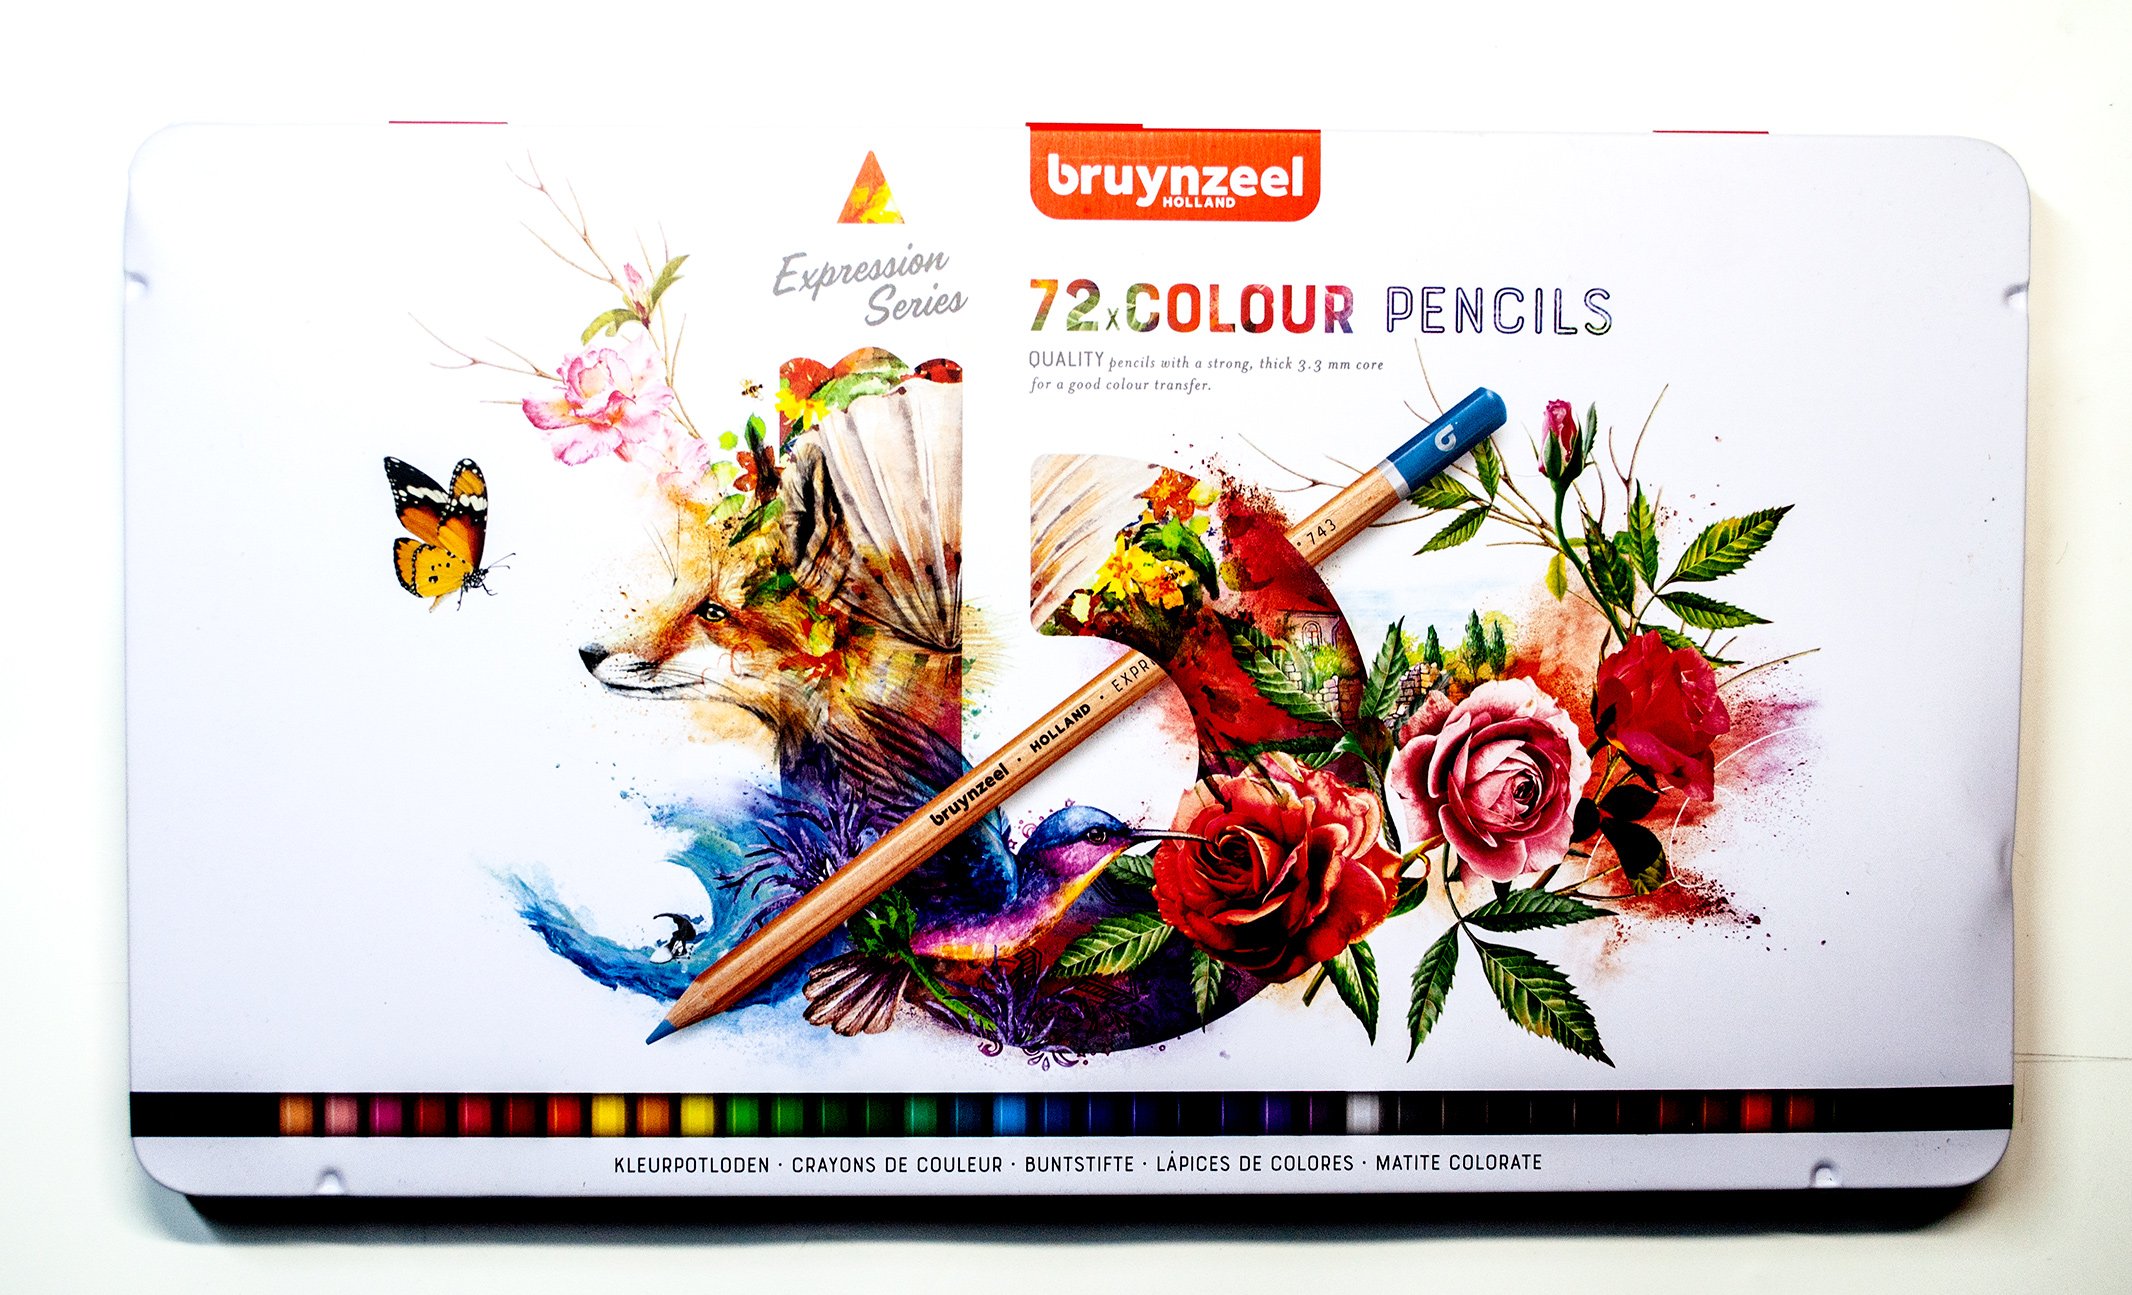 Silverwolf Cards: Reviewing a 'budget' set of colouring pencils.